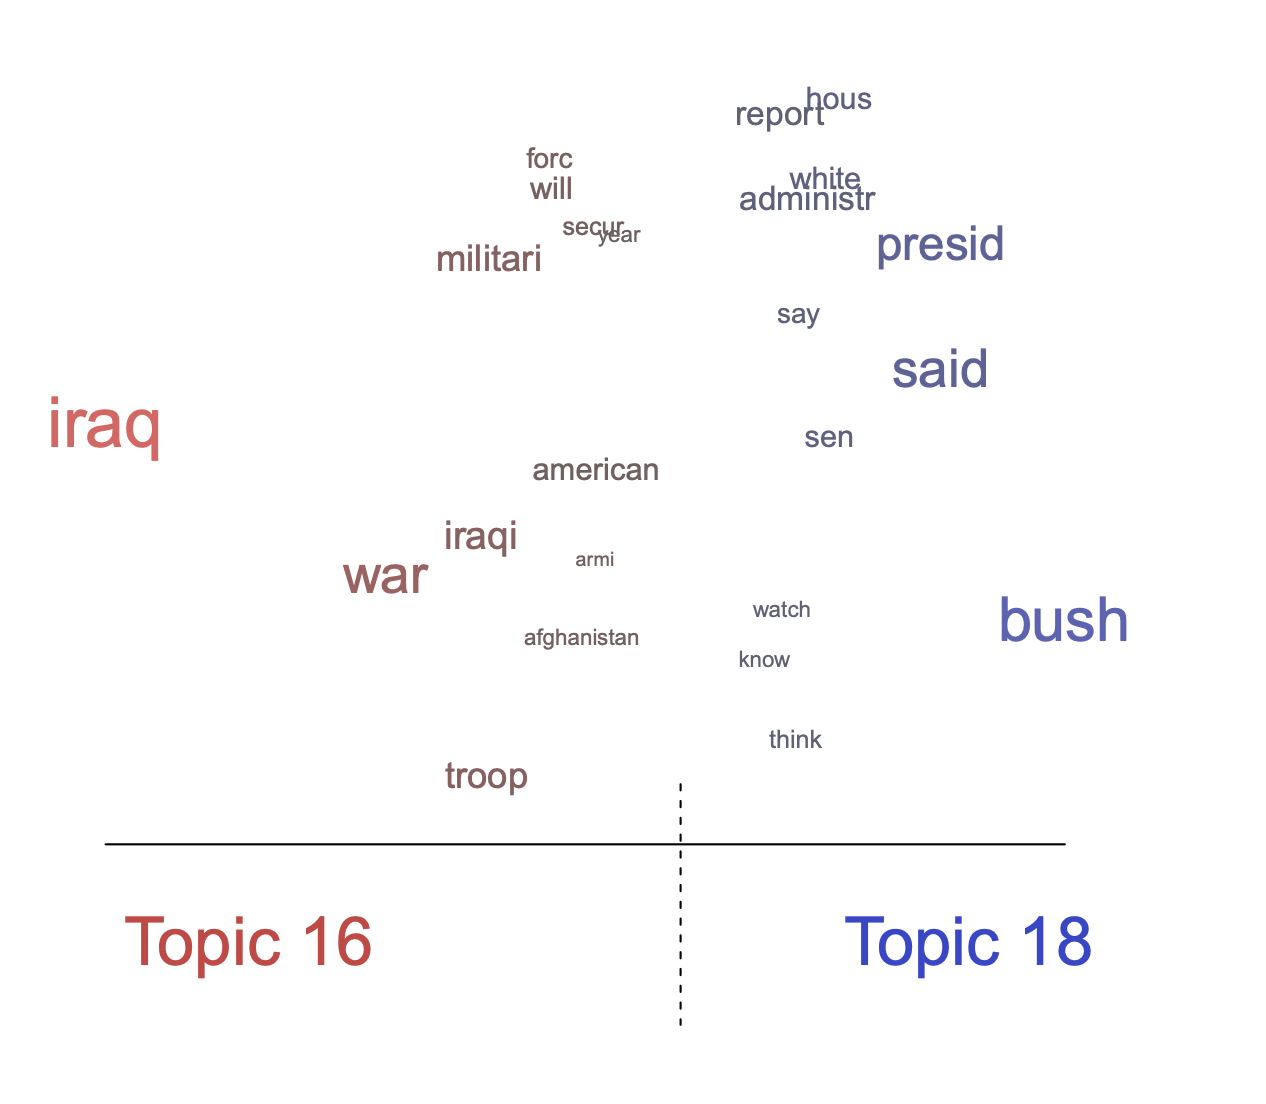 Figure 9: Graphical display of topical contrast between Topics 16 and 18.